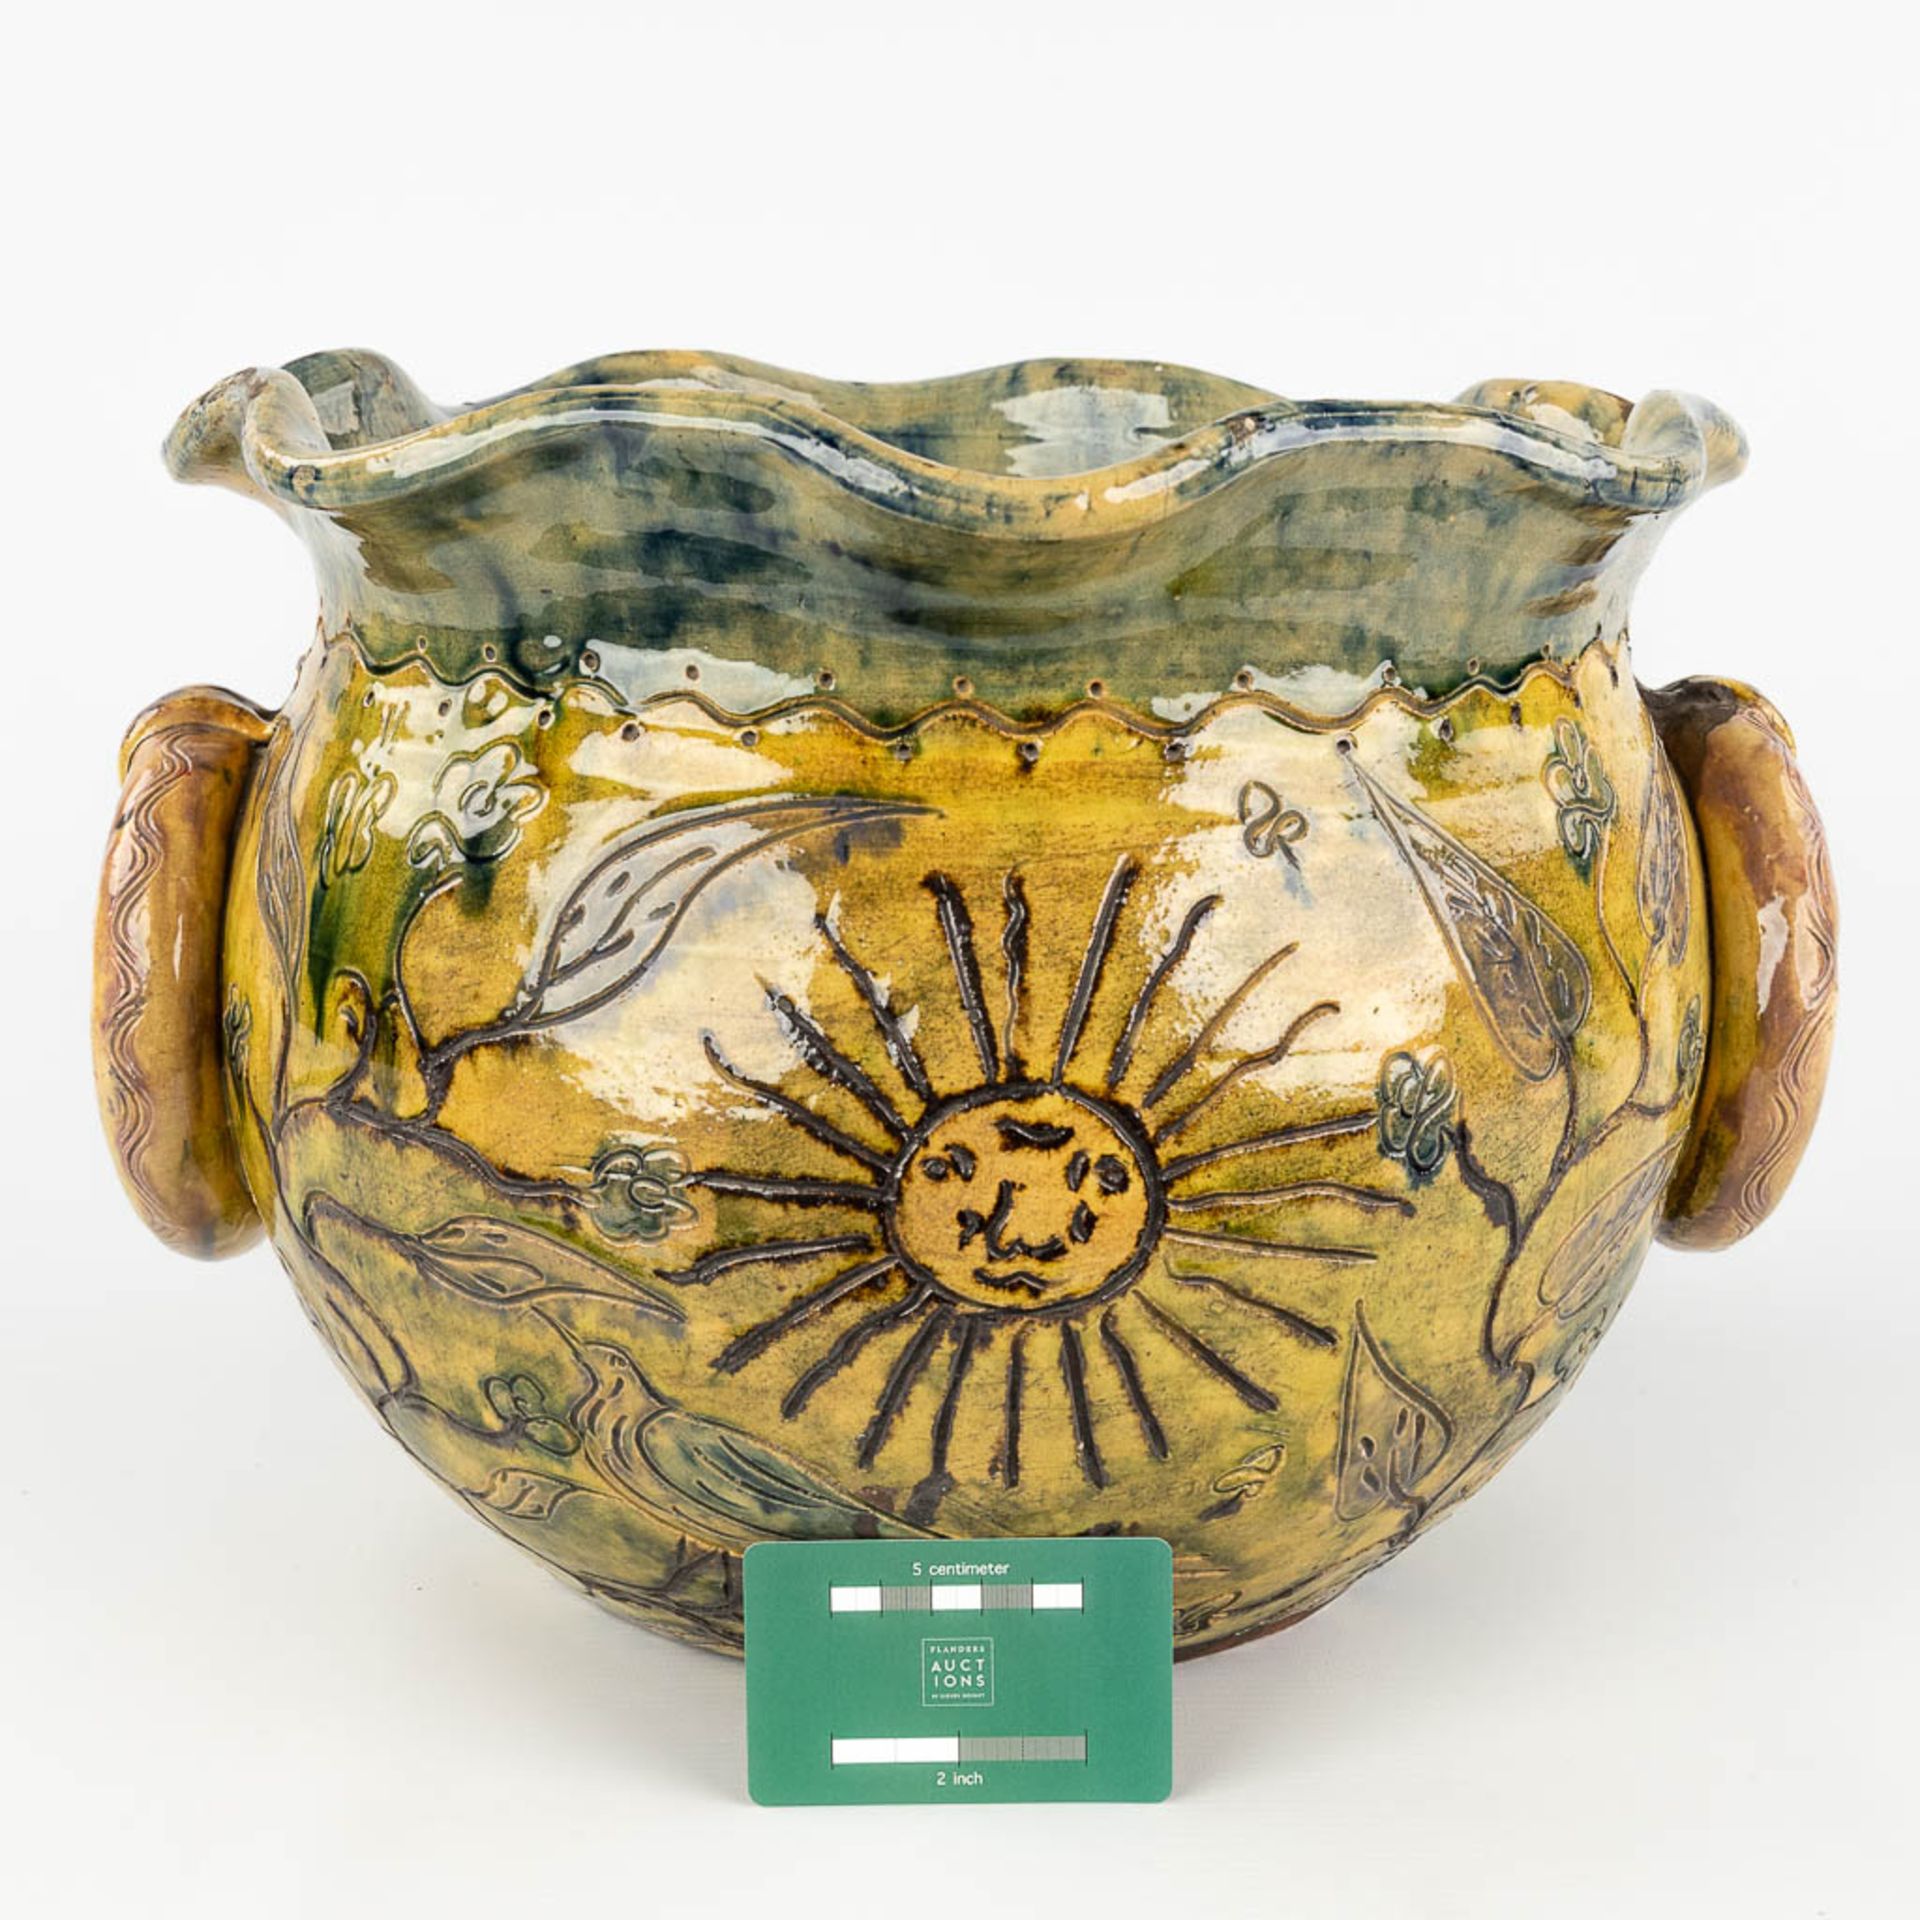 A Cache pot made of Flemish Earthenware, Bredene. 19th century. (L: 36,5 x W: 40 x H: 28 cm) - Image 2 of 12